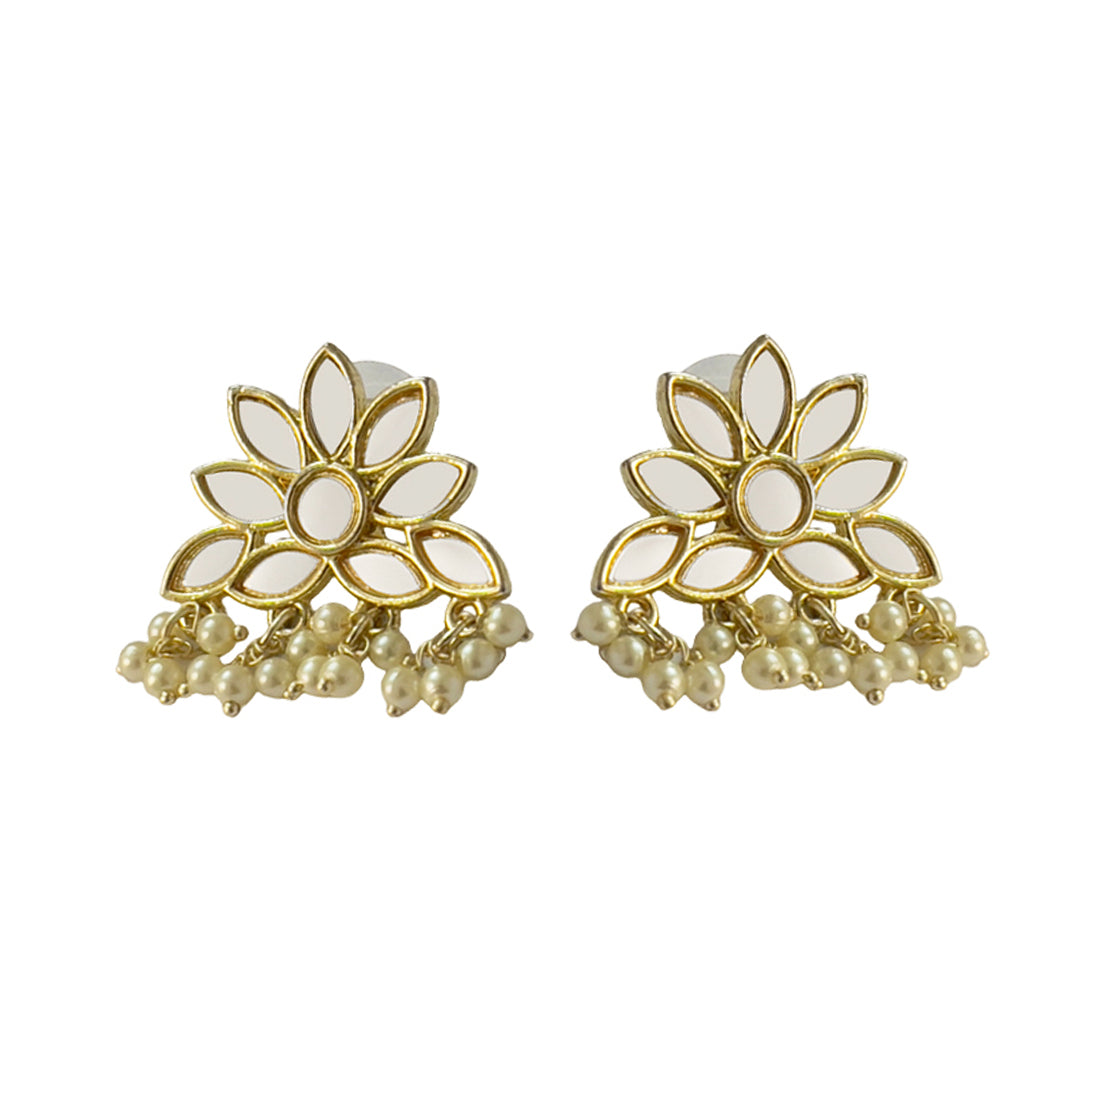 Half Flower Stud with Mirror Embellishments Gold-Toned Tiny Pearl Drop Earrings